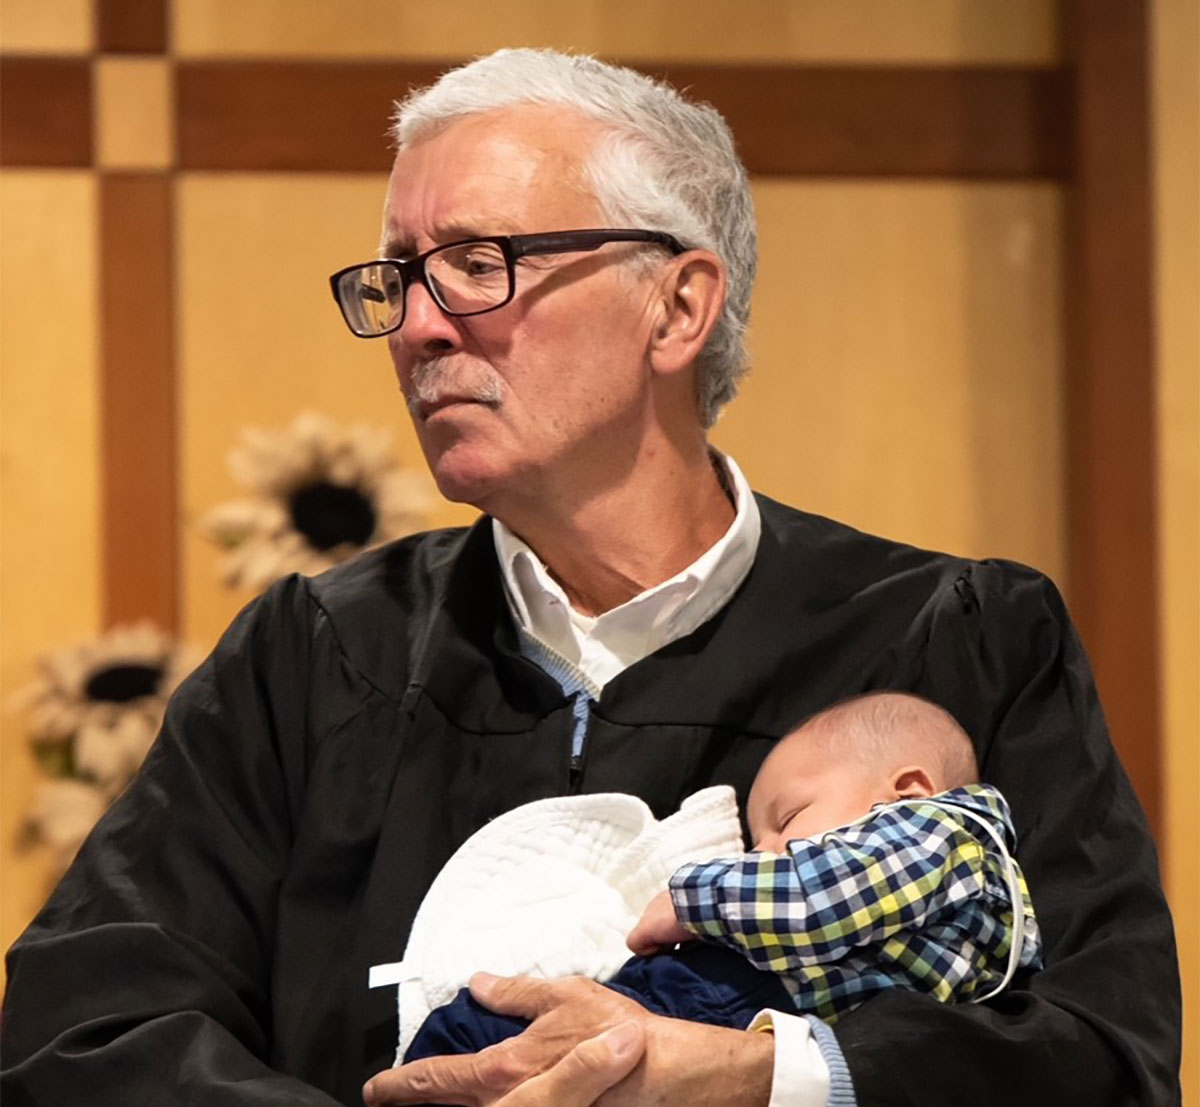 Judge Christopher Foley holds baby during an adoption proceeding